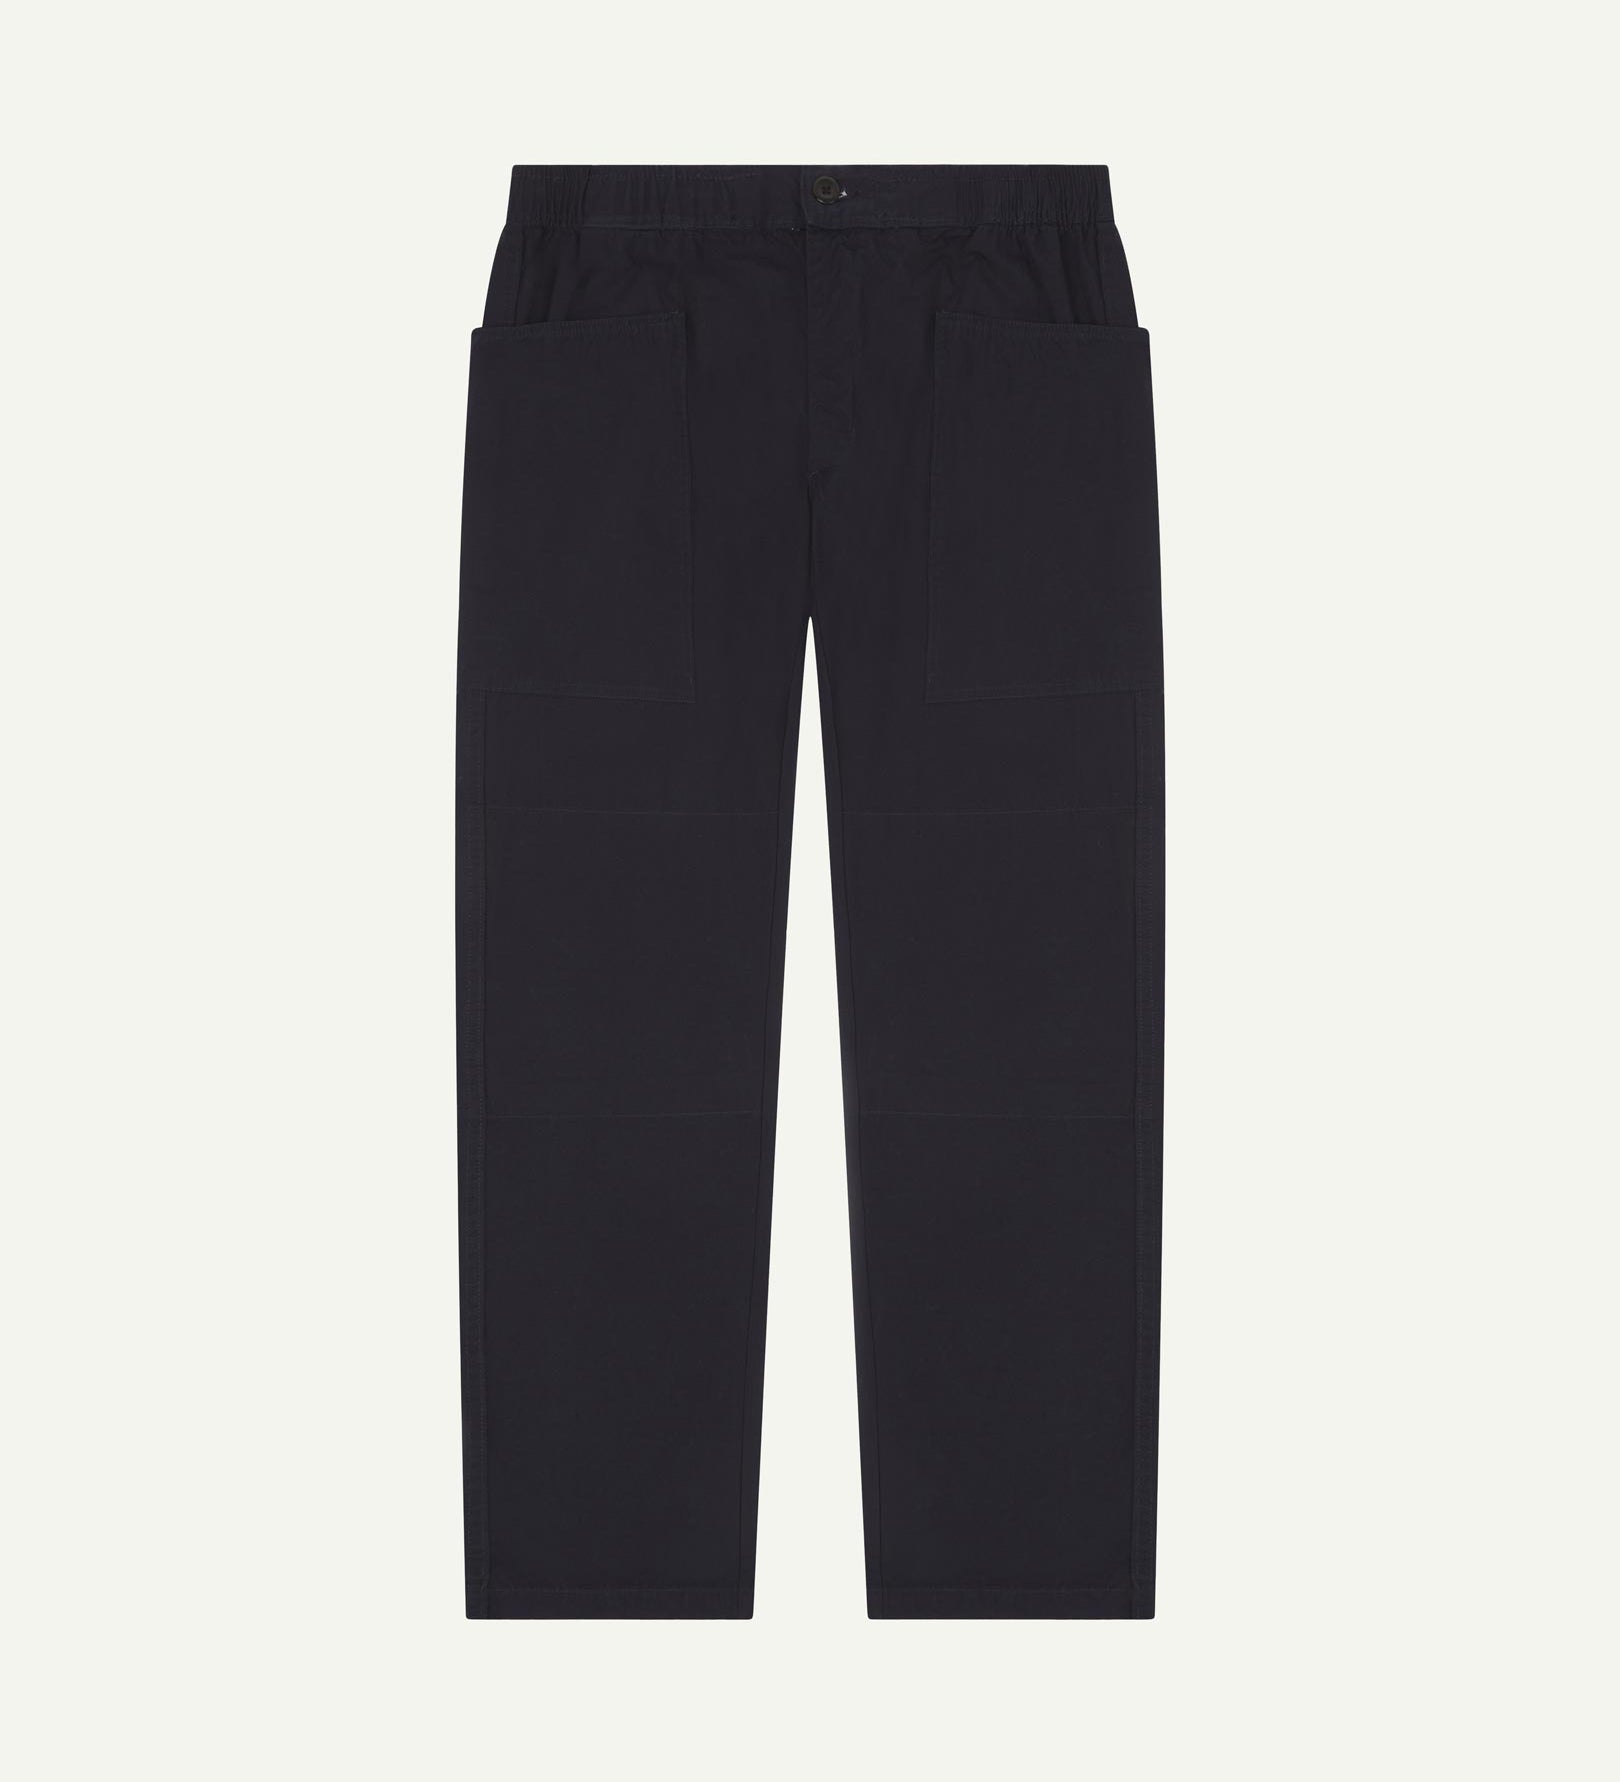 Front shot of 5011 Uskees men's organic 'midnight blue-green' casual trousers. Clearly showing the elasticated waist, front pockets and tapered leg.